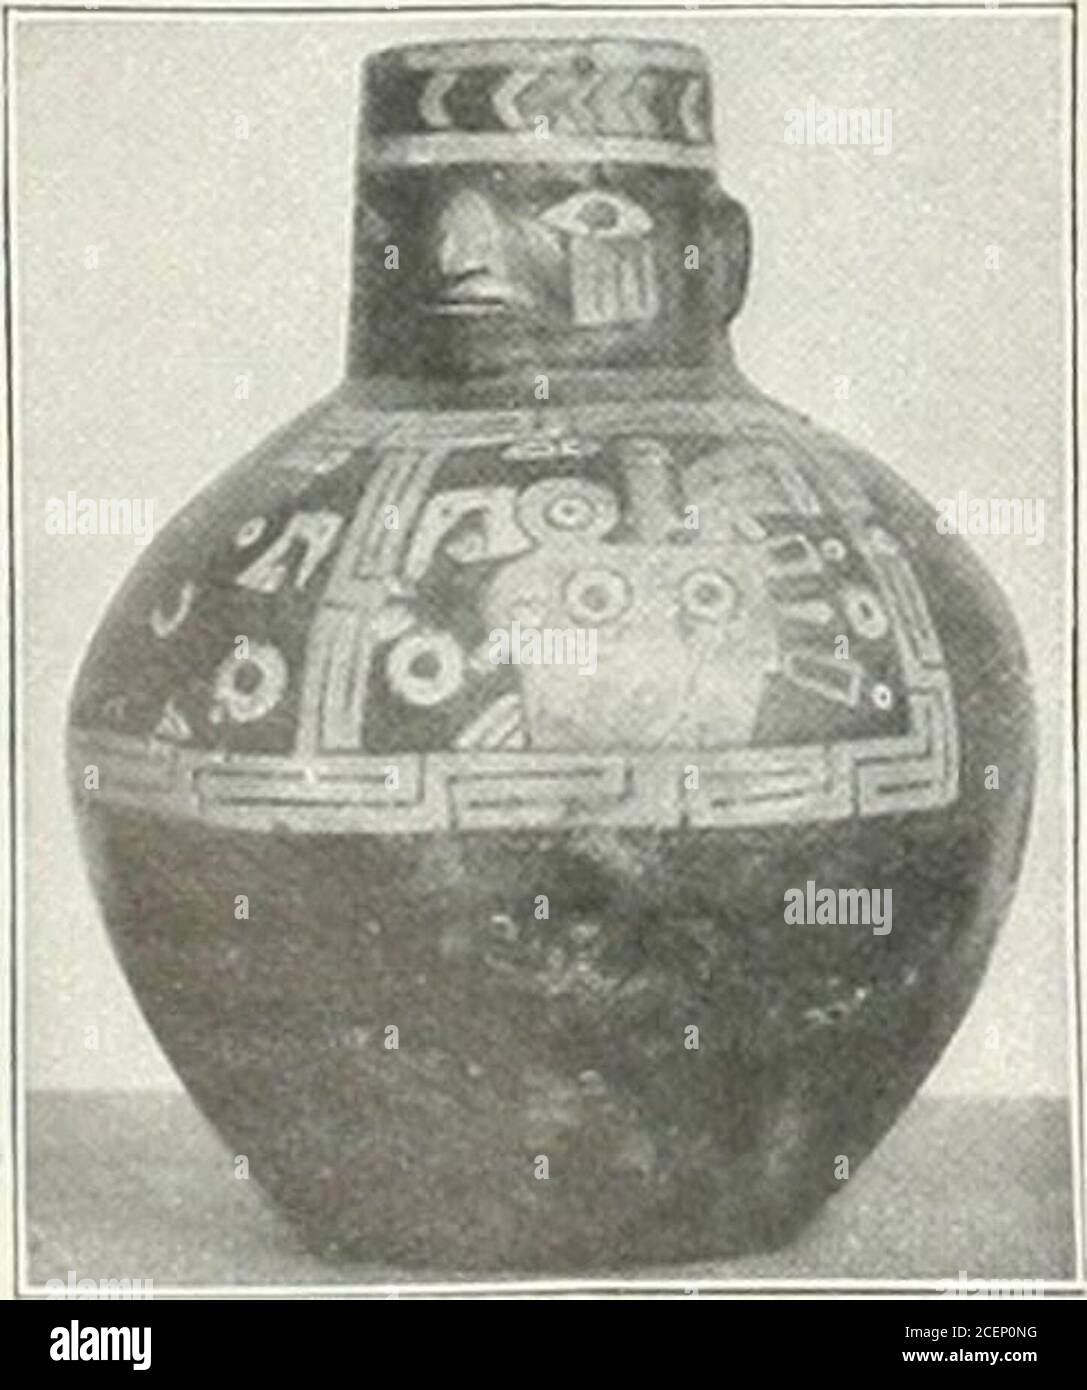 . The Encyclopædia britannica; a dictionary of arts, sciences, literature and general information. Fig. 6.—Two Typical Stone Sculptures in theform of human heads, with characteristicornaments. Interior of Costa Rica, CentralAmerica. Culture of the Guetar. Fig. 7.—Large Gold Human Figure,with a gold coco-flask in eachhand; gold diadem, nose and earornaments, and chains on neckand legs. Antioquia, Columbia.Chibcha culture. Fig. S.—Stone Vessel supported^ by proneHuman Figure. Interior of Costa Rica,Central America. Culture of the Guetar.. Stock Photo